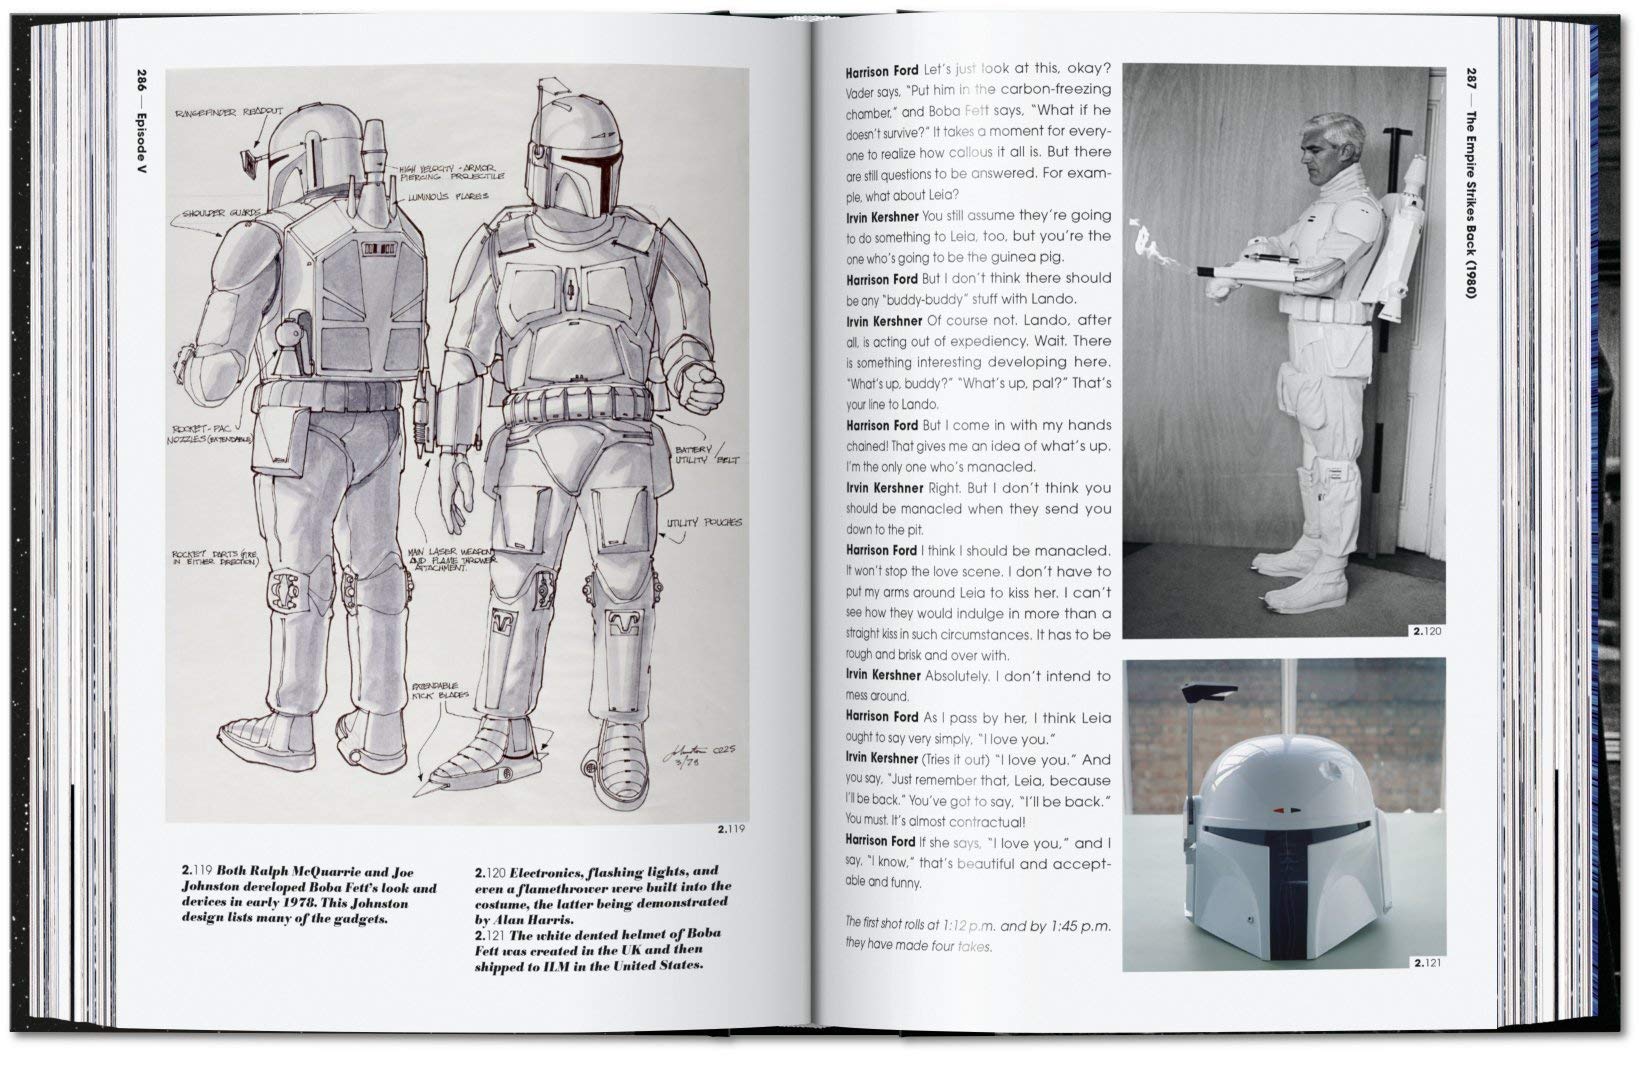 The Star Wars Archives. 1977-1983. 40th Anniversary Edition - Secret Location